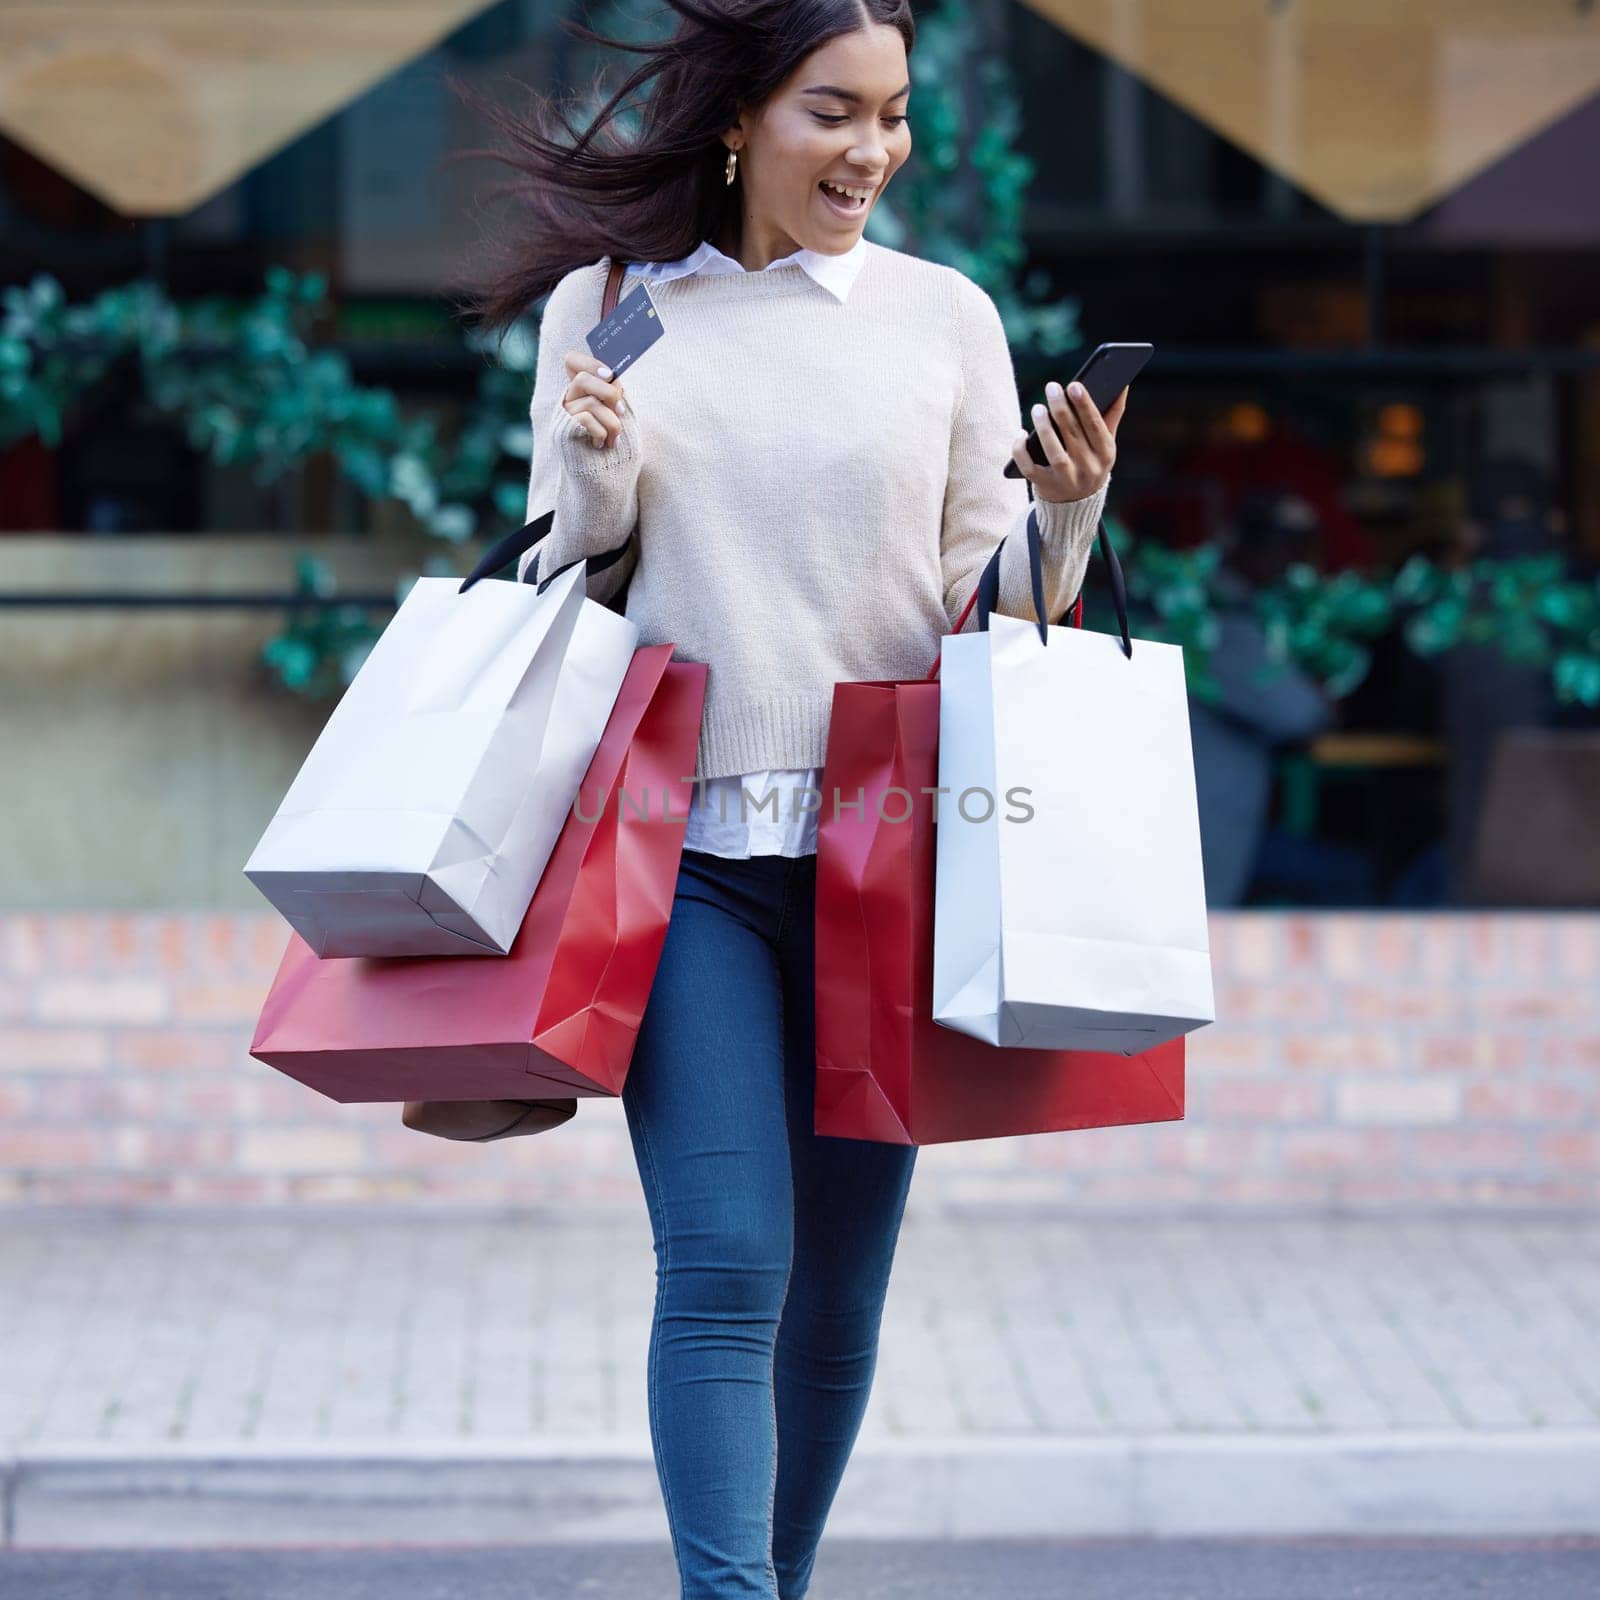 Phone, credit card and woman with shopping bags in city with posh, rich and luxury lifestyle. Fashion, young and female person walking in town after sale purchase from store and online retail shop